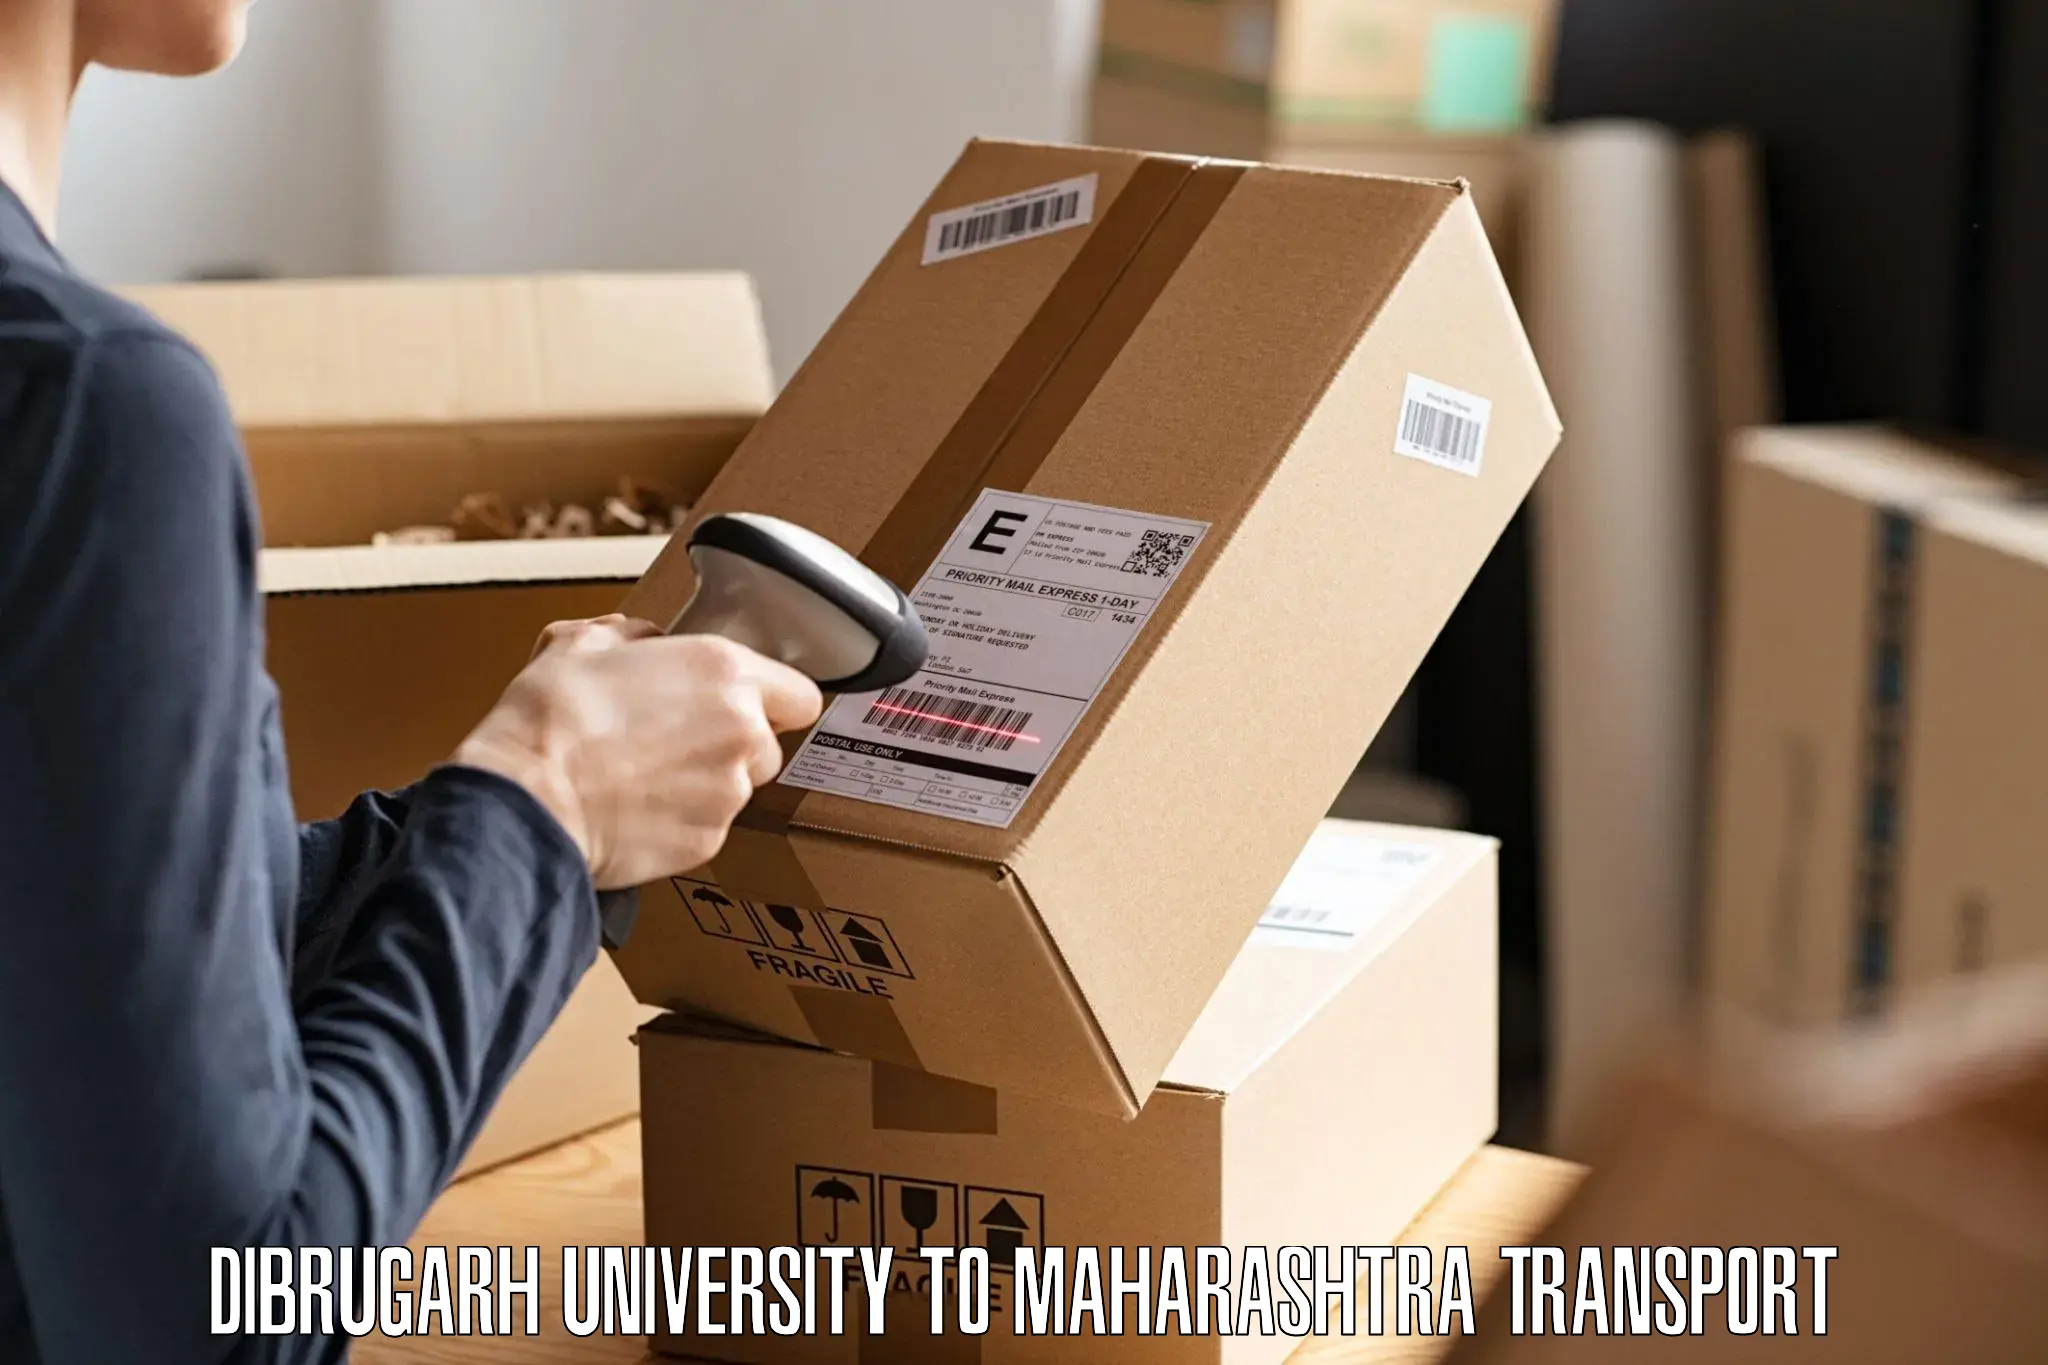 Land transport services Dibrugarh University to Beed